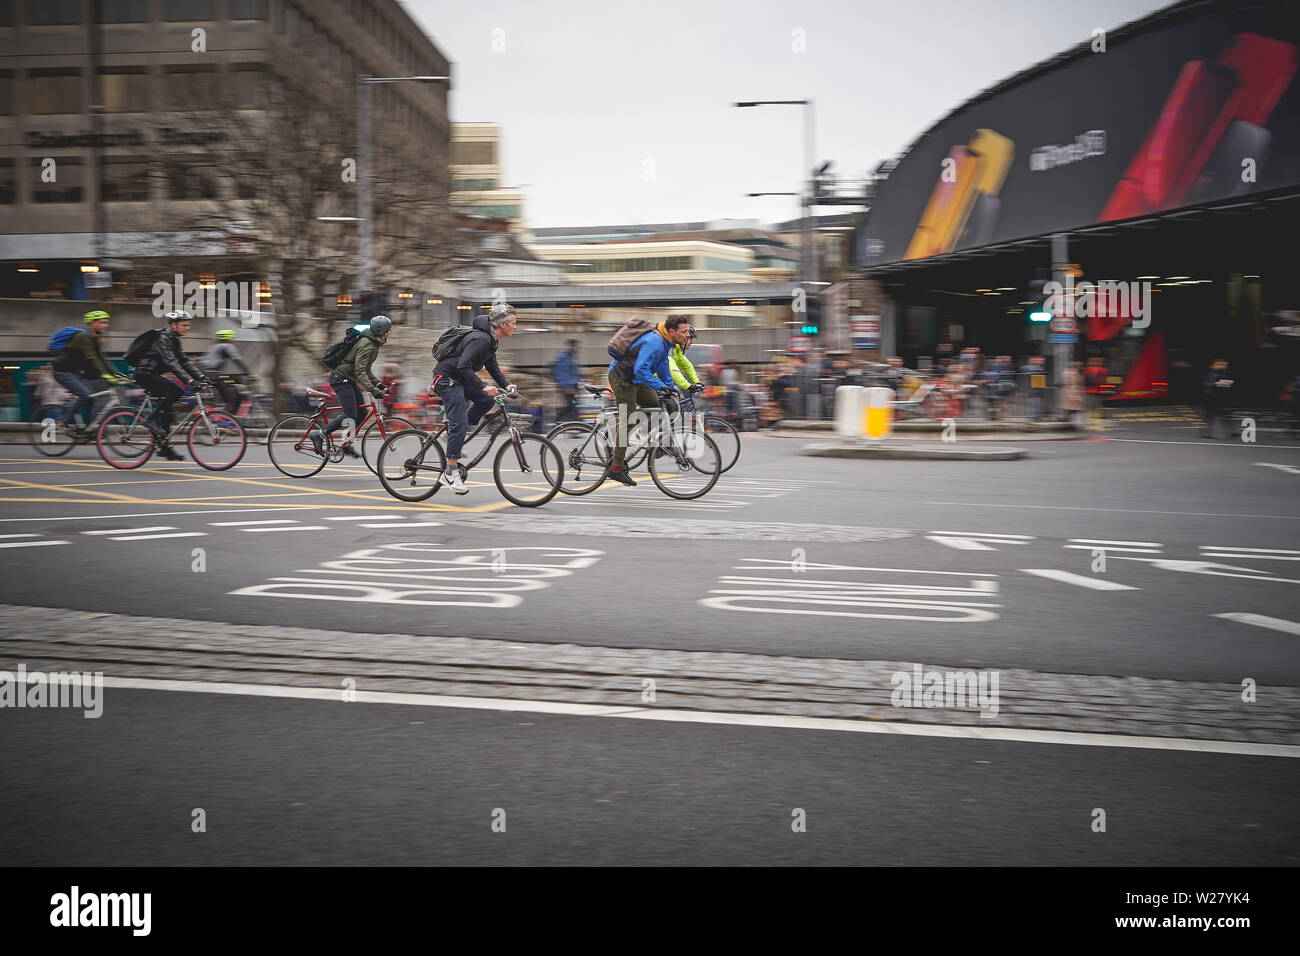 London, UK - April, 2019. Cyclists commuting in central London during rush hour. Stock Photo